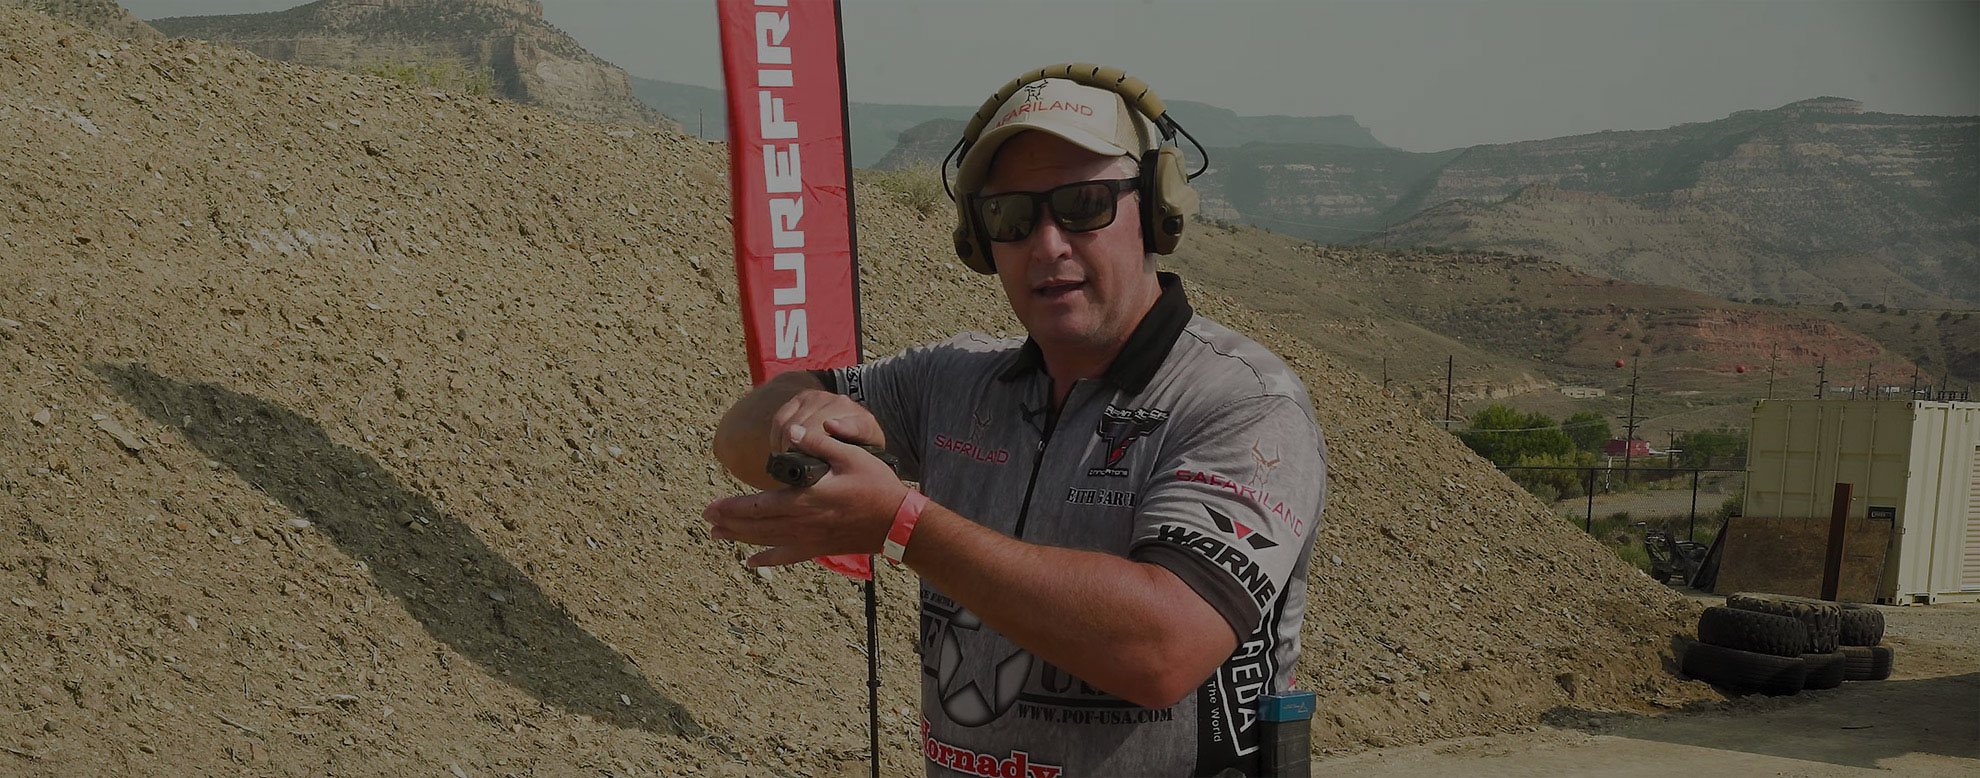 SureFire Field Notes 76: Keith Garcia3-Gun Competition Practice and the WMDs